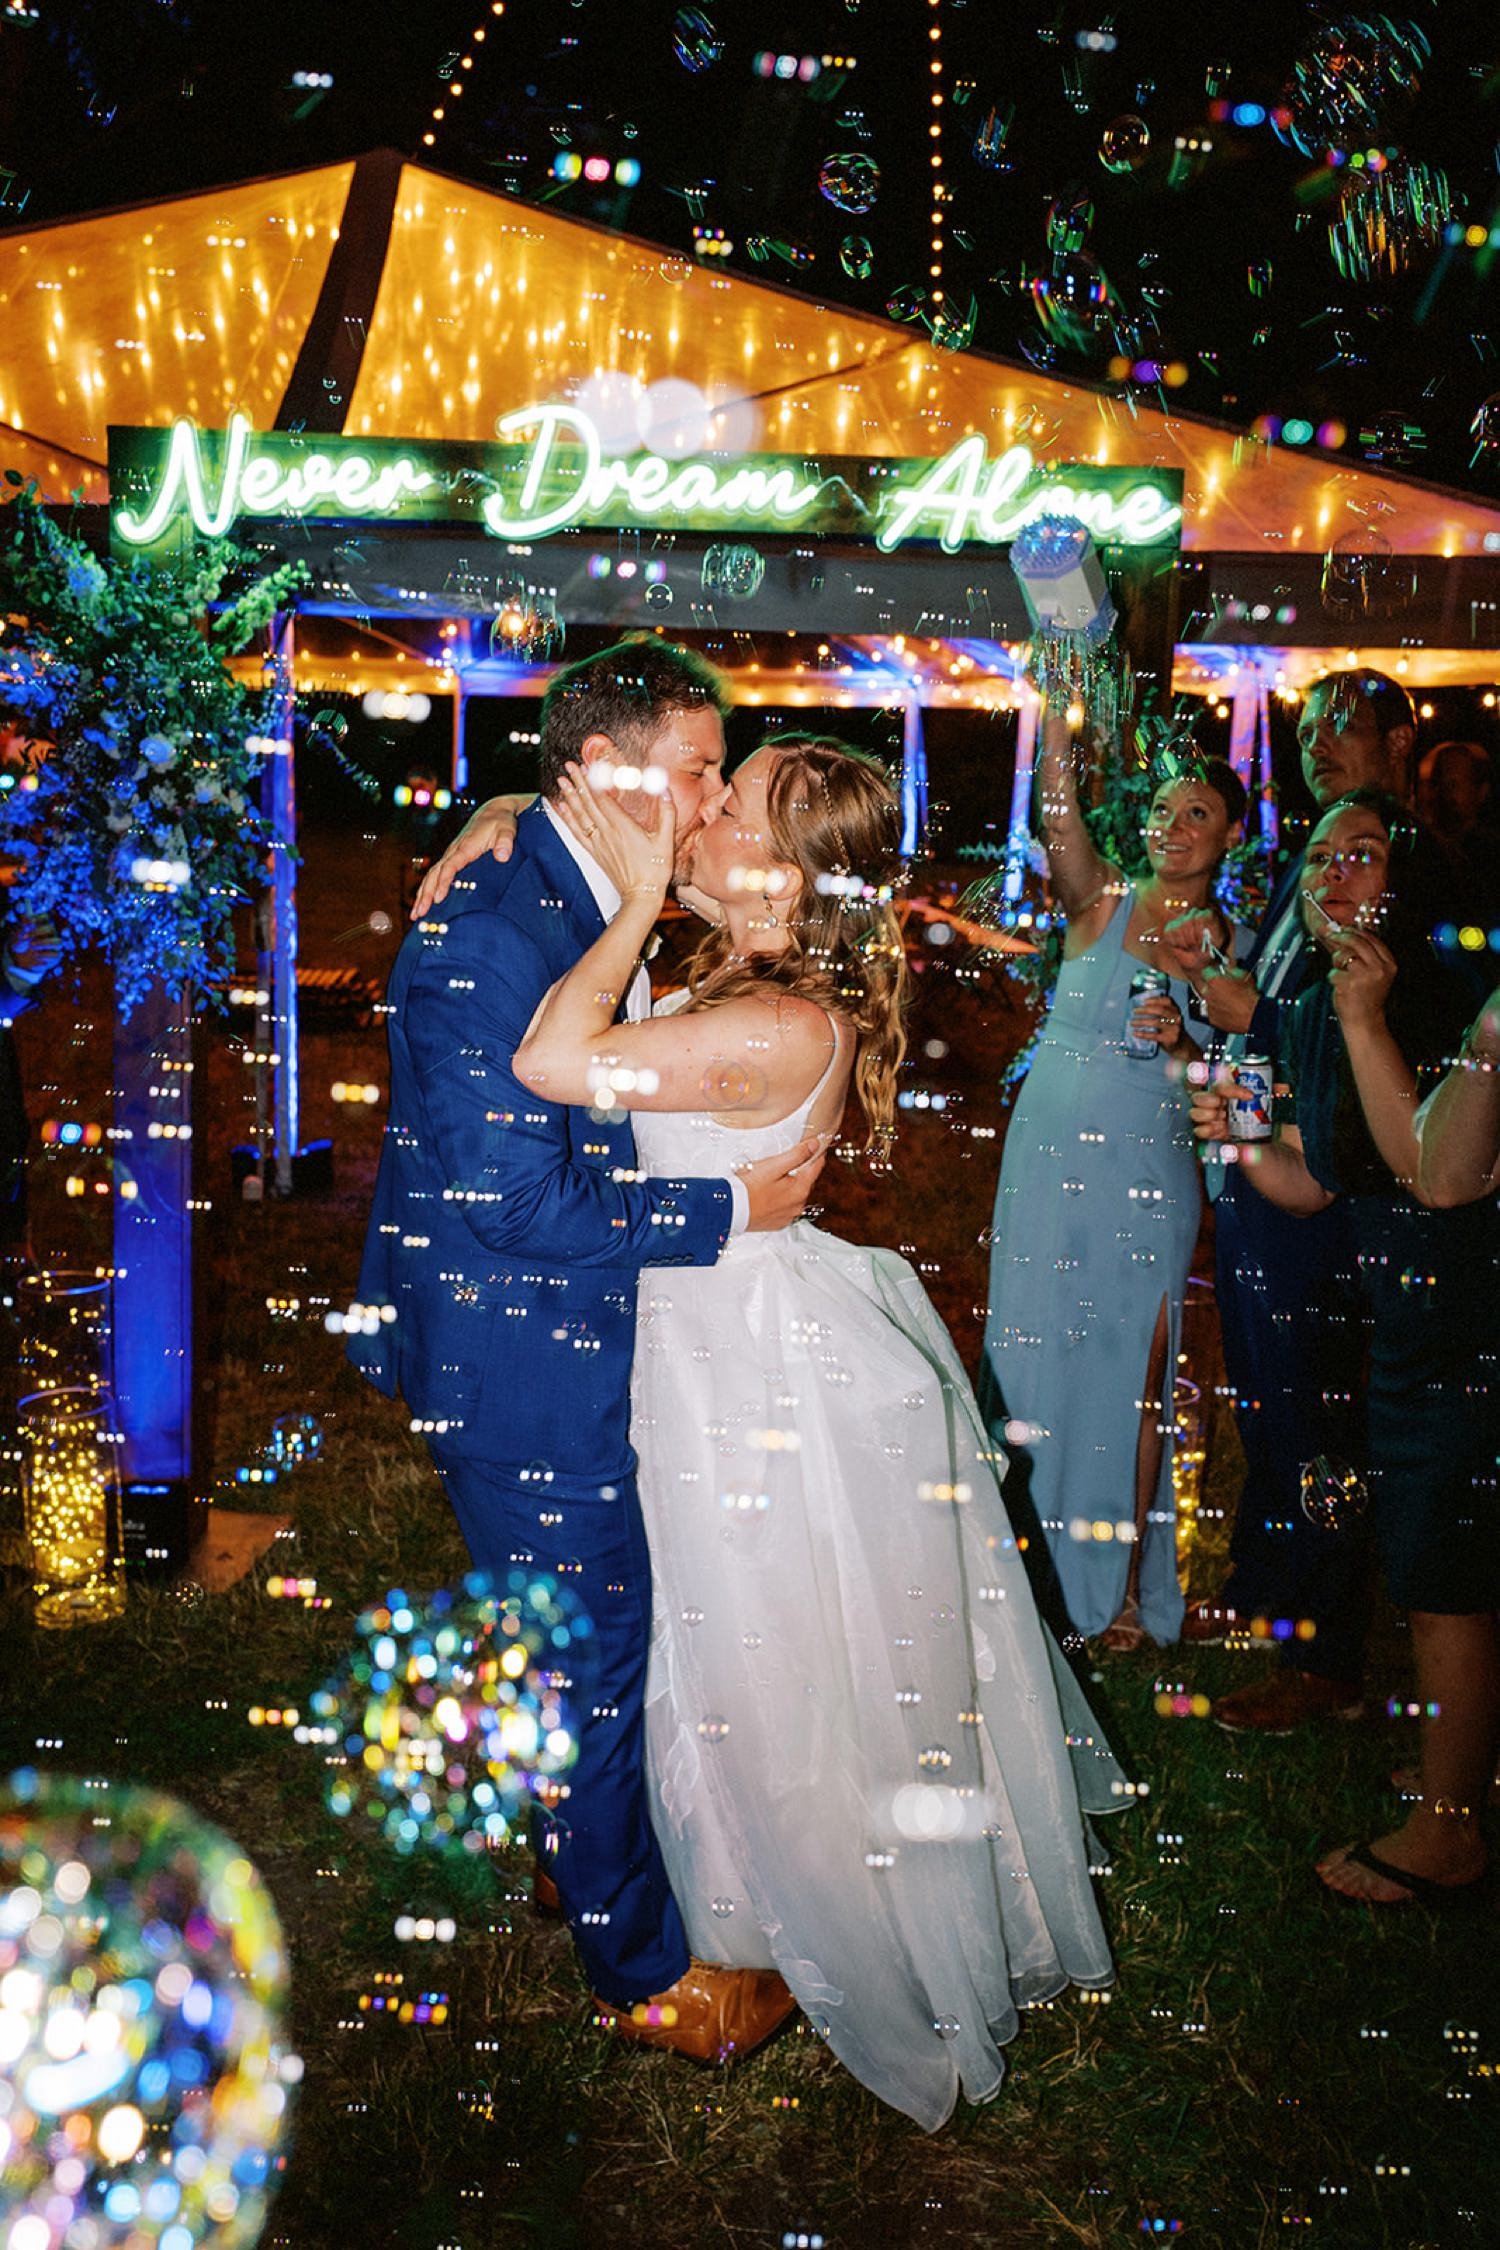 077_Lakedale Resort wedding with colorful neon sign and a bubble exit.jpg